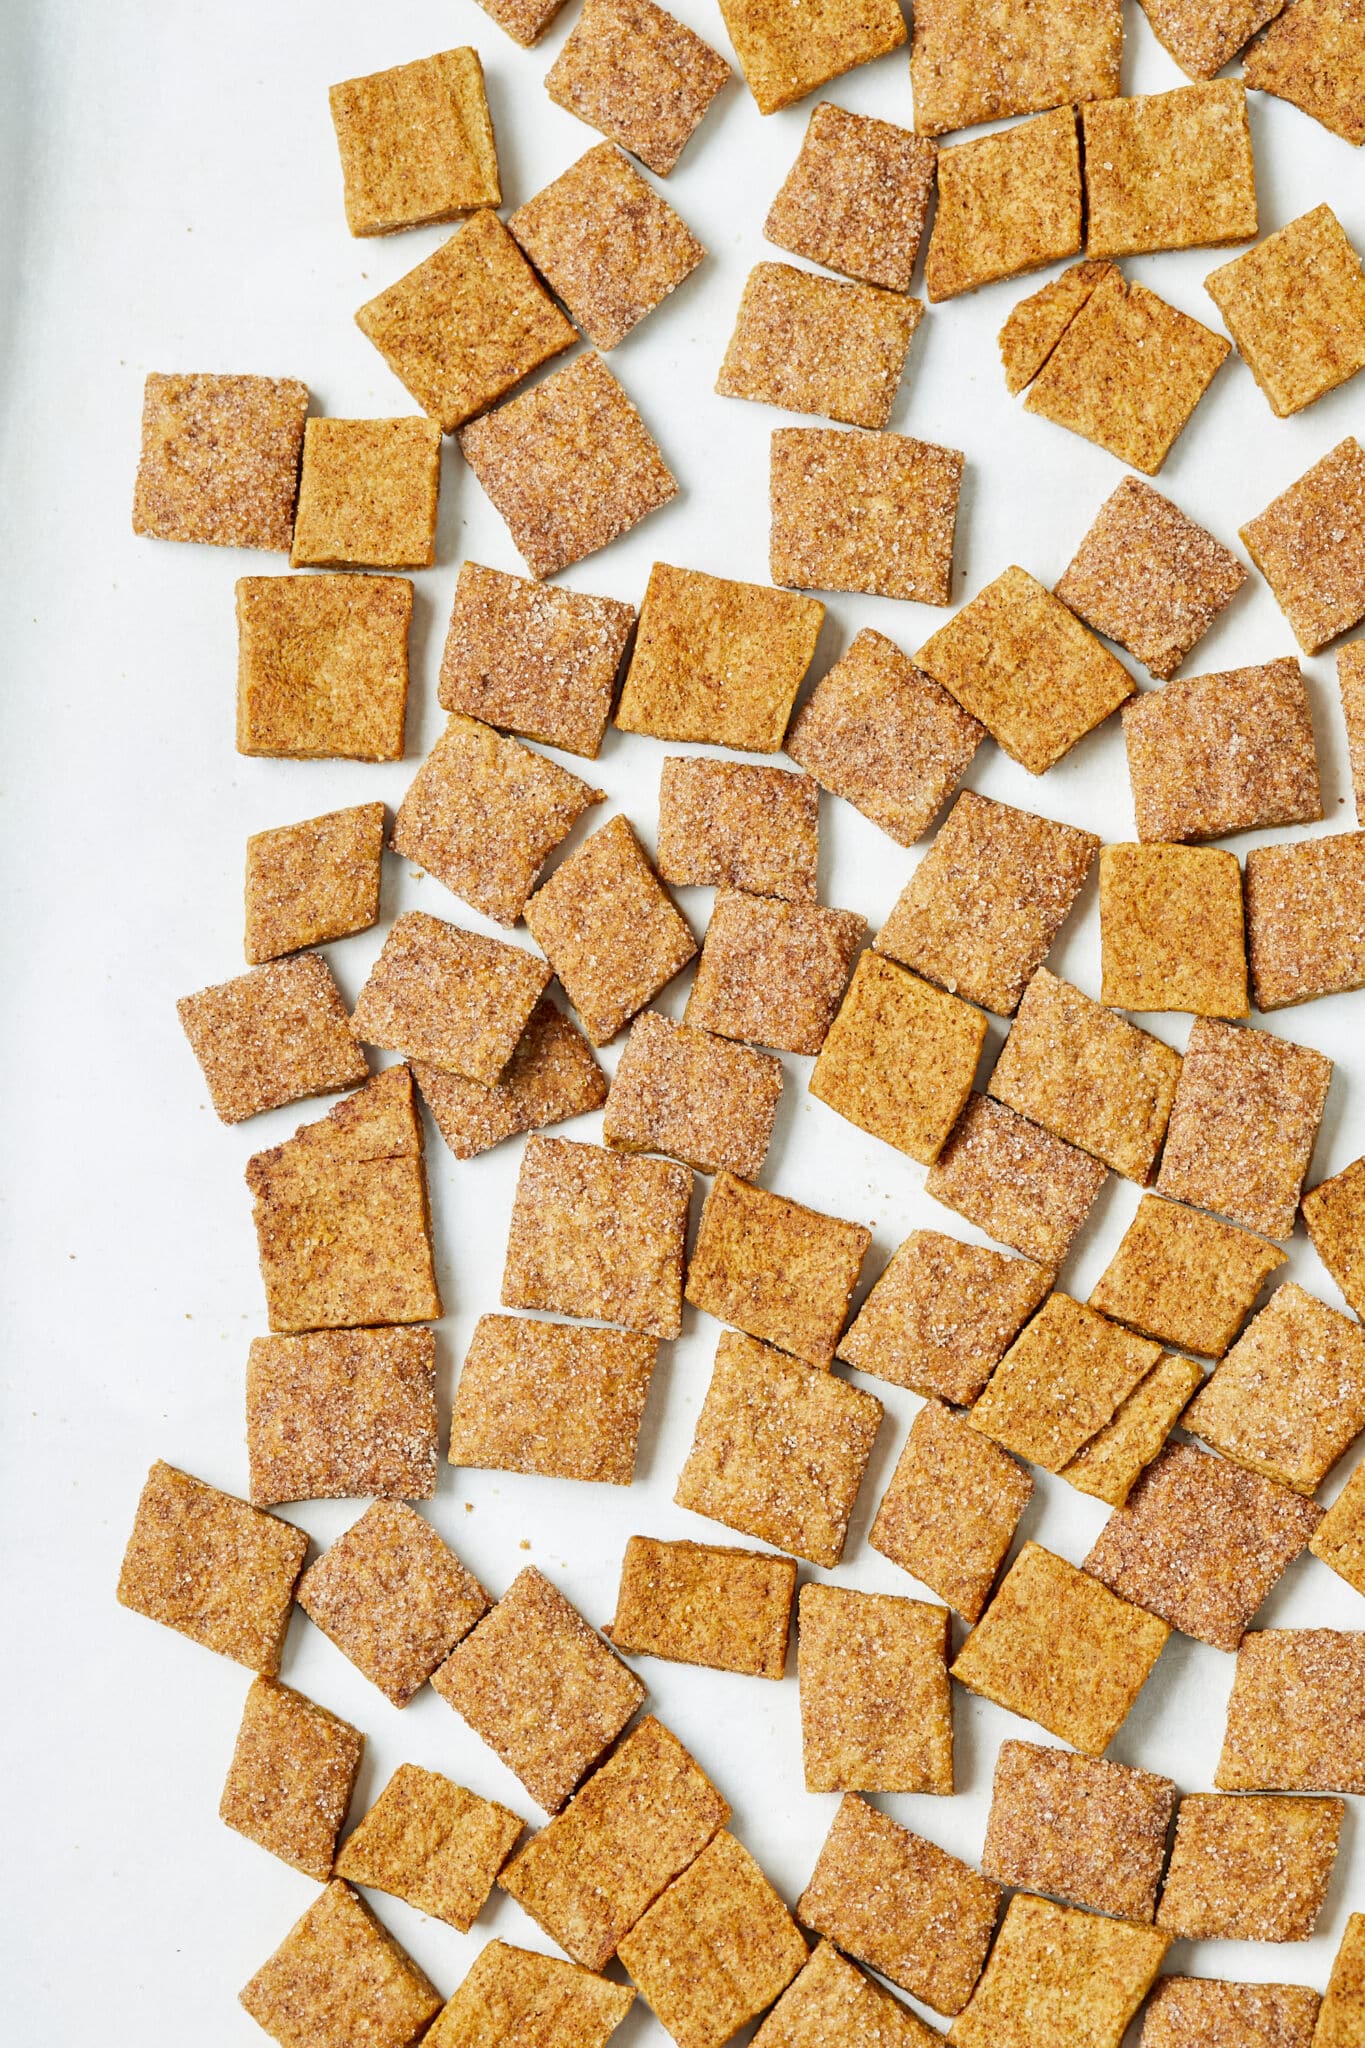 Homemade Cinnamon Toast Crunch is spread out isn one layer. They look miles ahead of store-bought in a perfect bite size and hearty, extra-crispy squares of sweet, warmly-spicy cinnamon flavor.